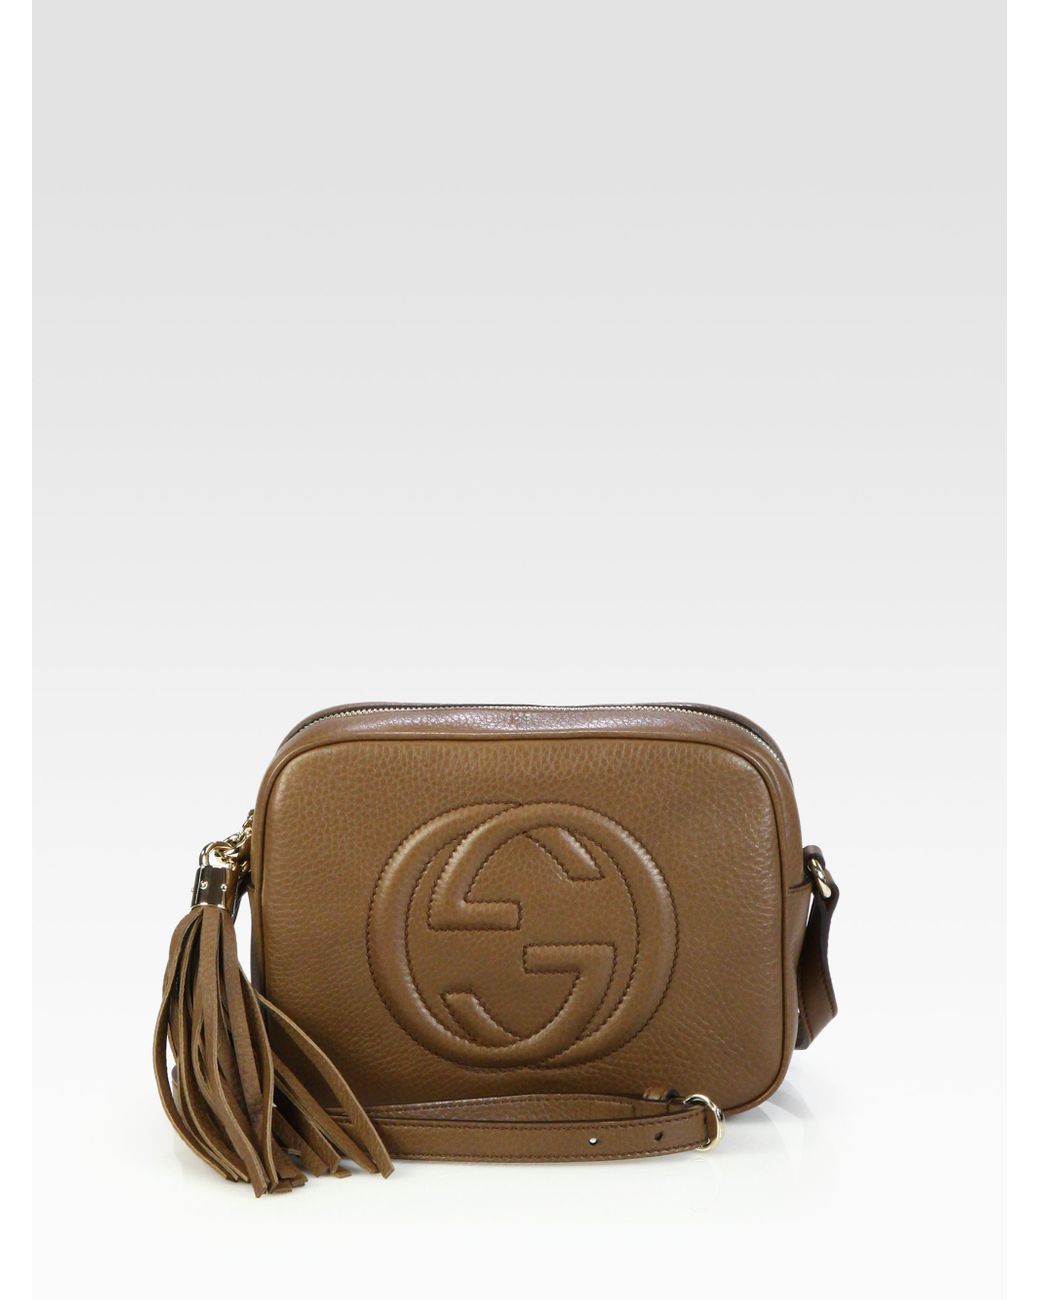 Gucci Soho Leather Disco Bag in Brown | Lyst